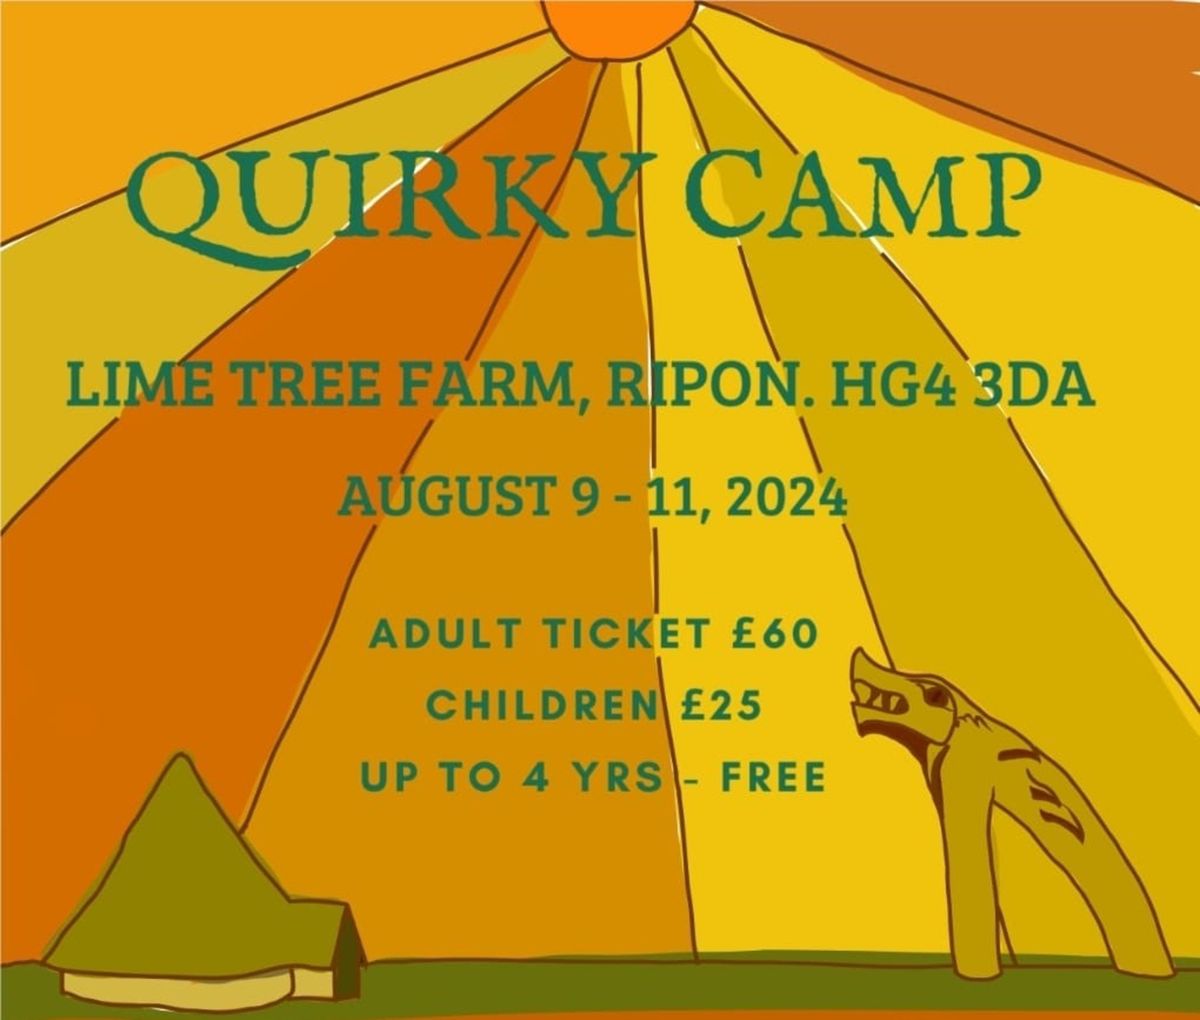 QUIRKY CAMP